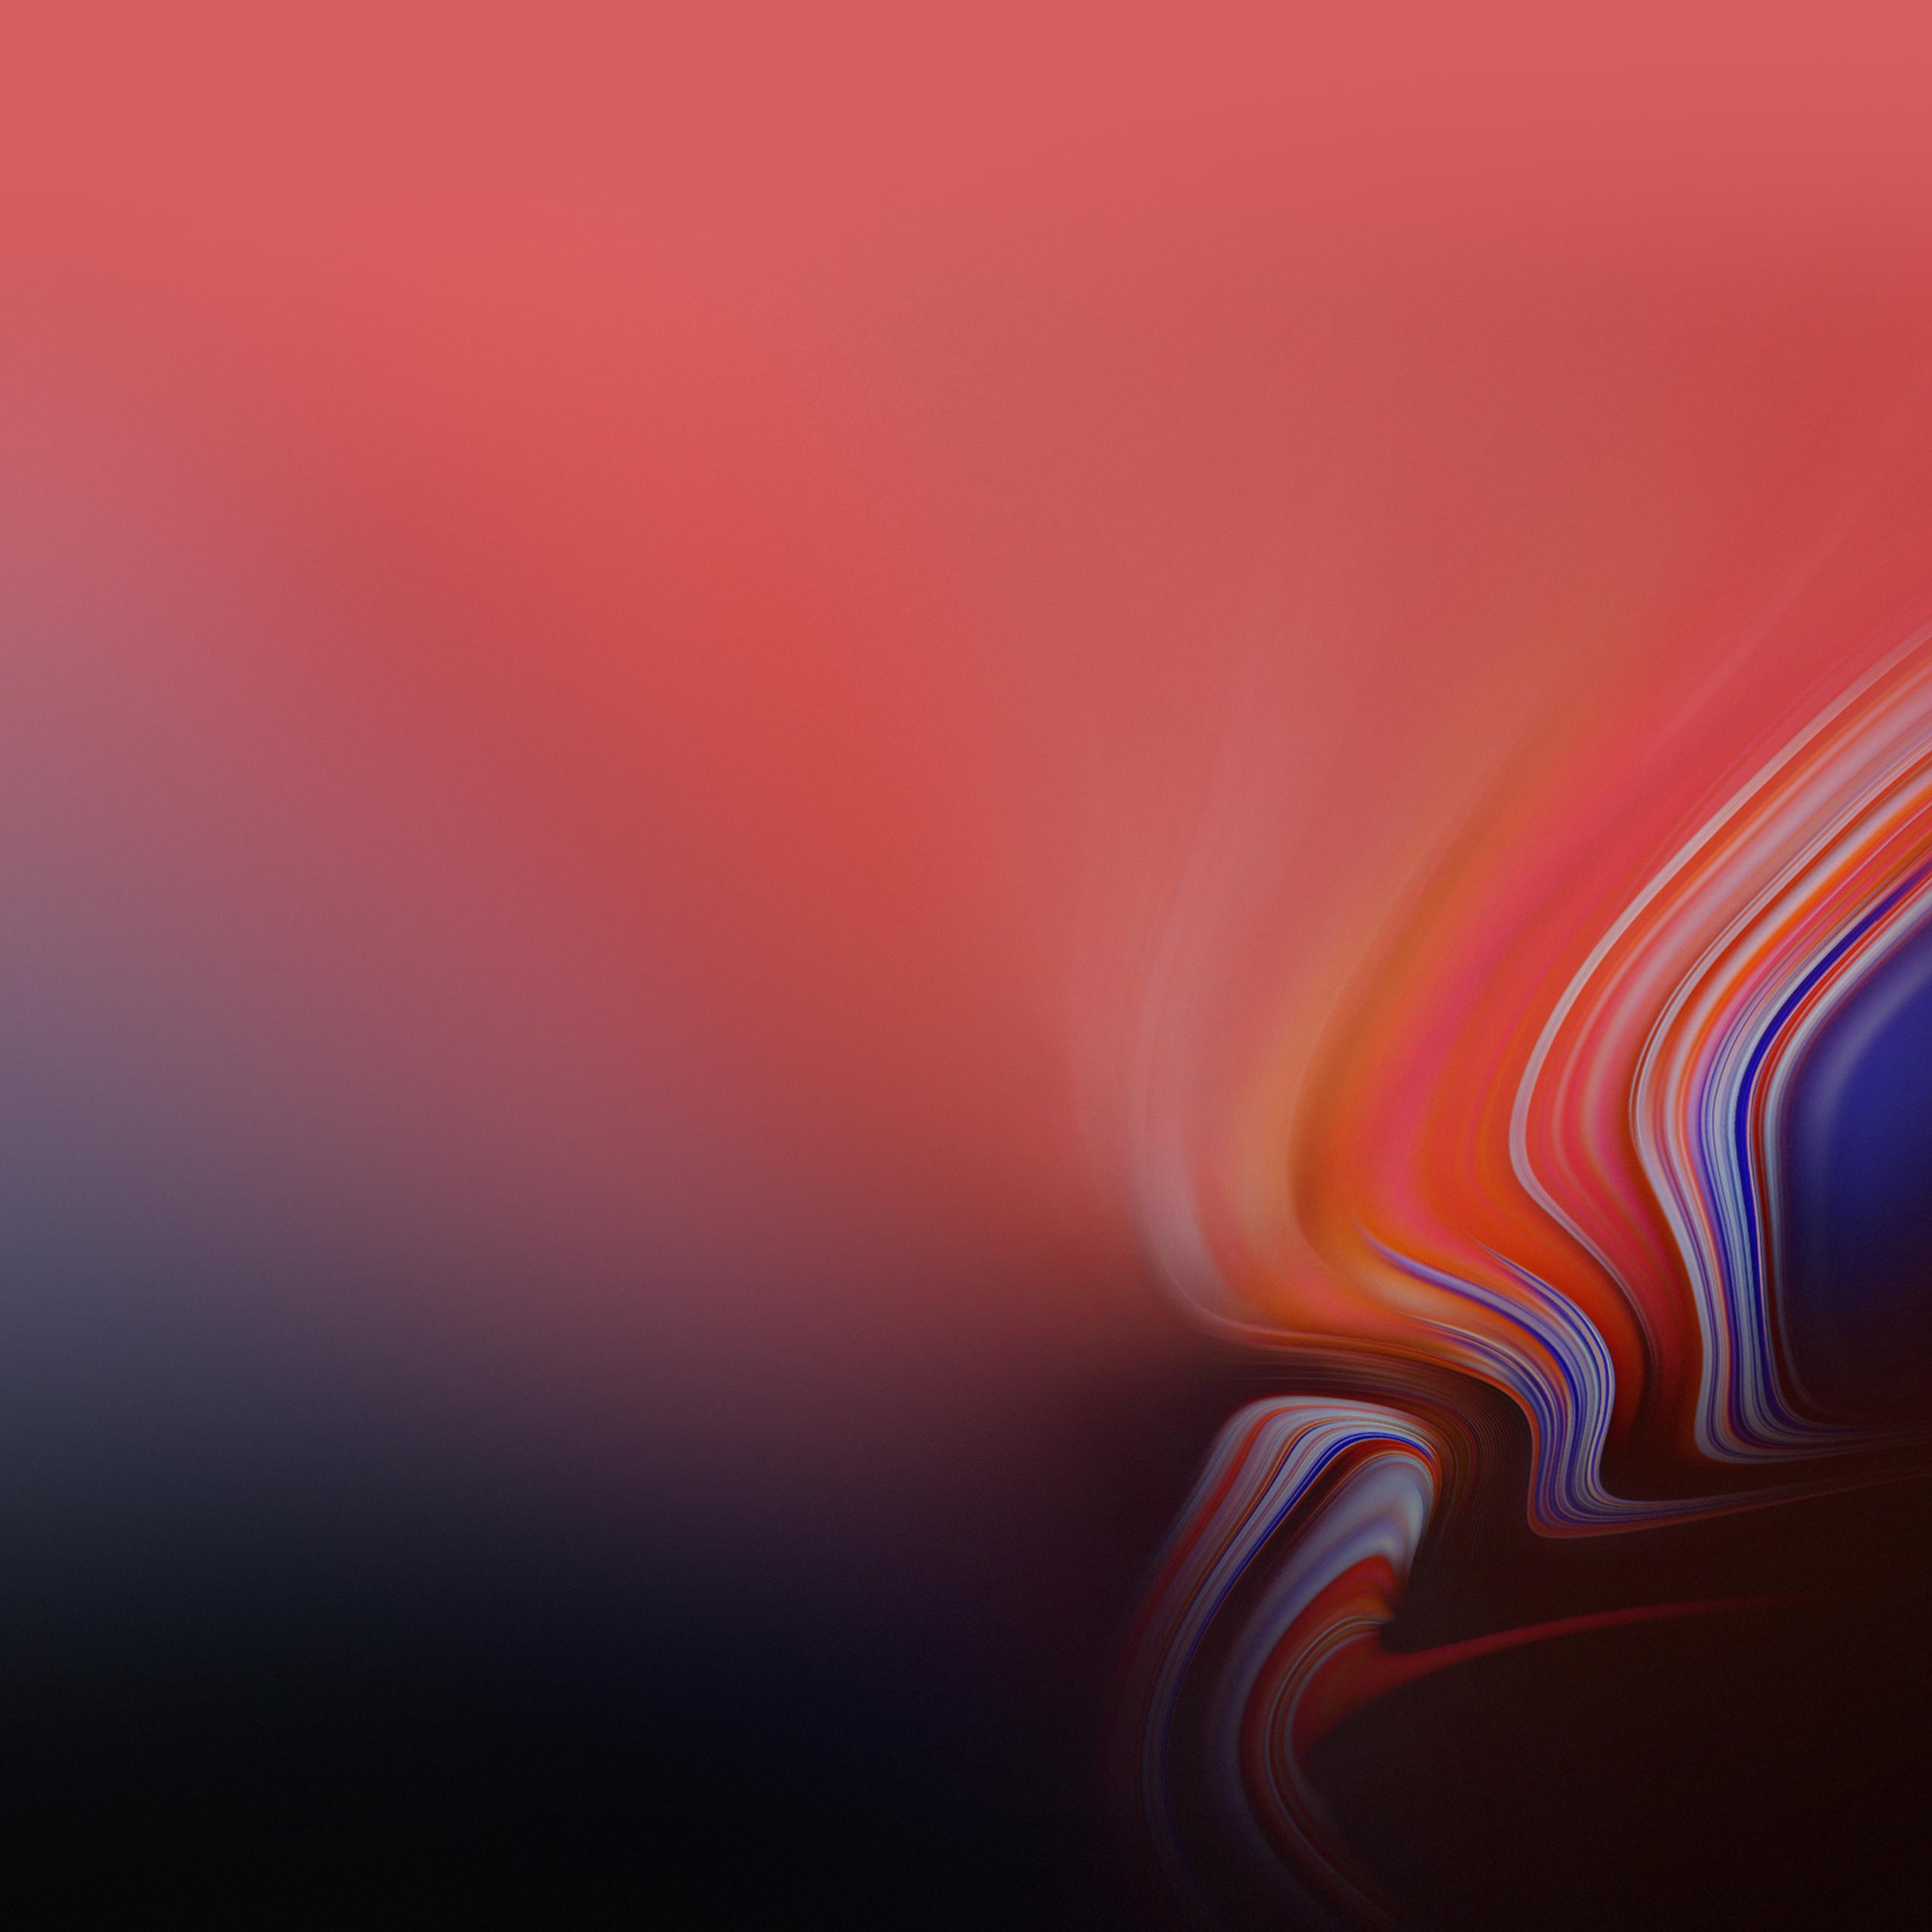 Download the official Galaxy Tab S4 wallpapers here